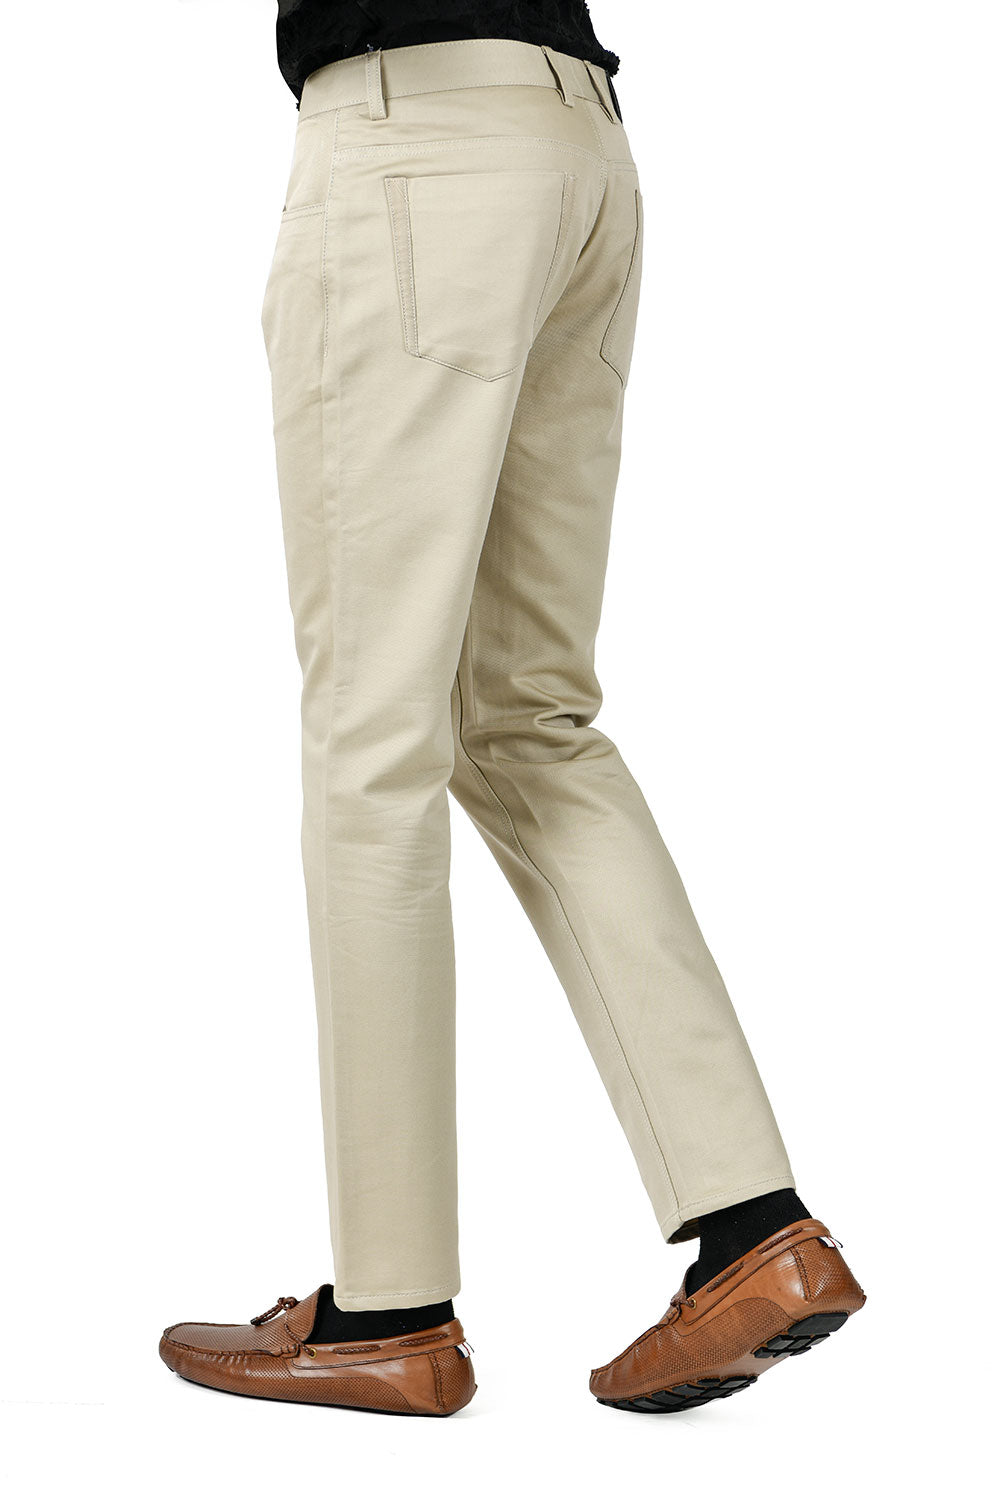 Barabas Men's Solid Color Zip and Sand Straight Fit Pants B2060